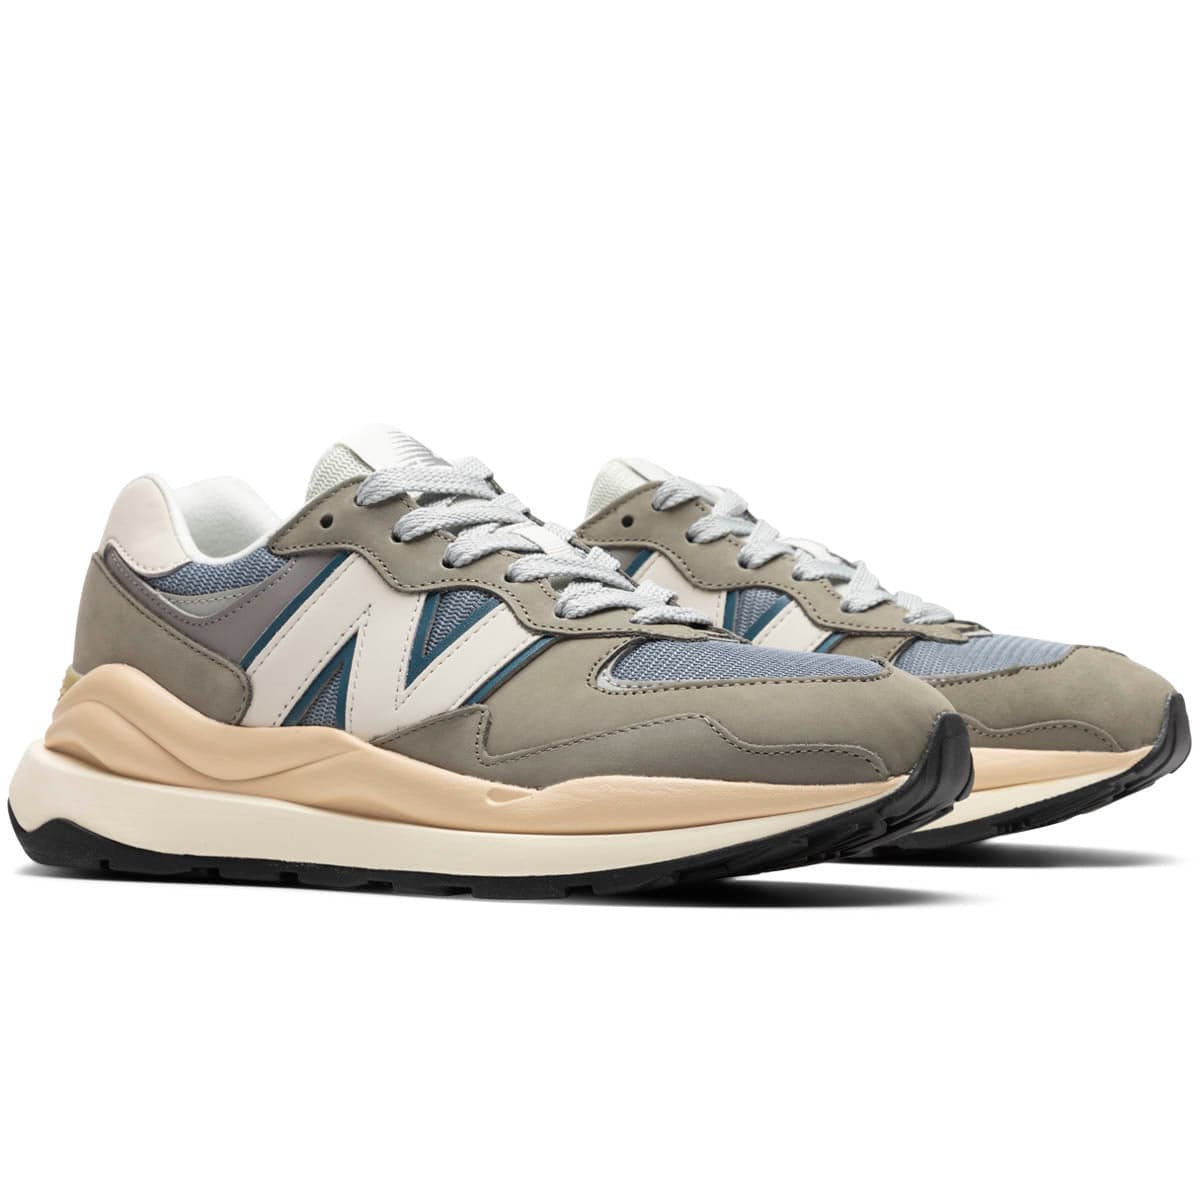 New Balance Sneakers M5740LLG